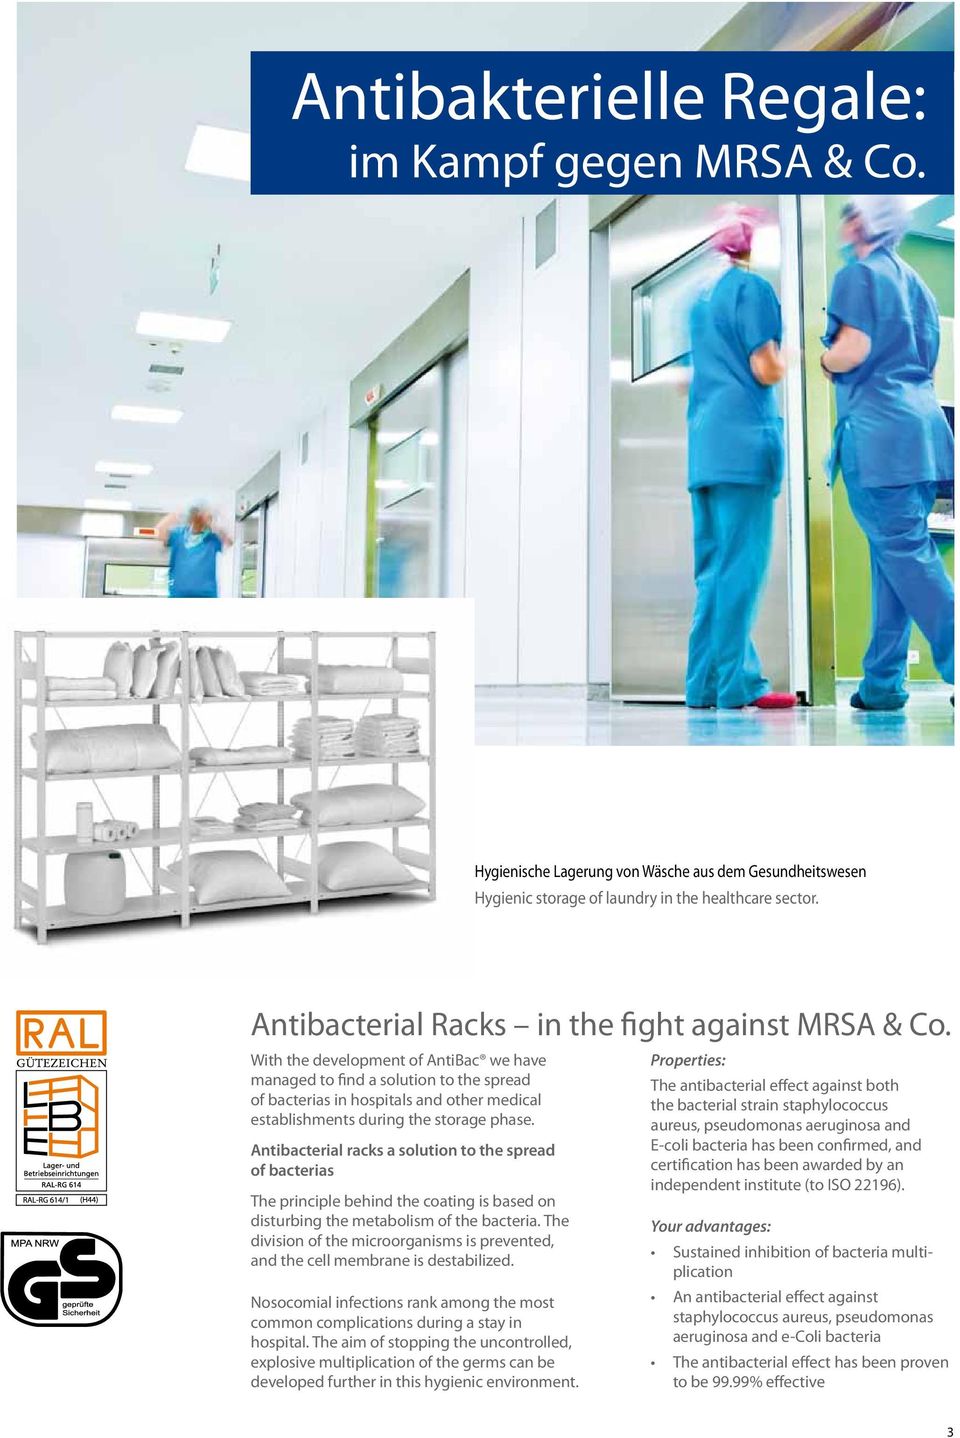 With the development of AntiBac we have managed to find a solution to the spread of bacterias in hospitals and other medical establishments during the storage phase.